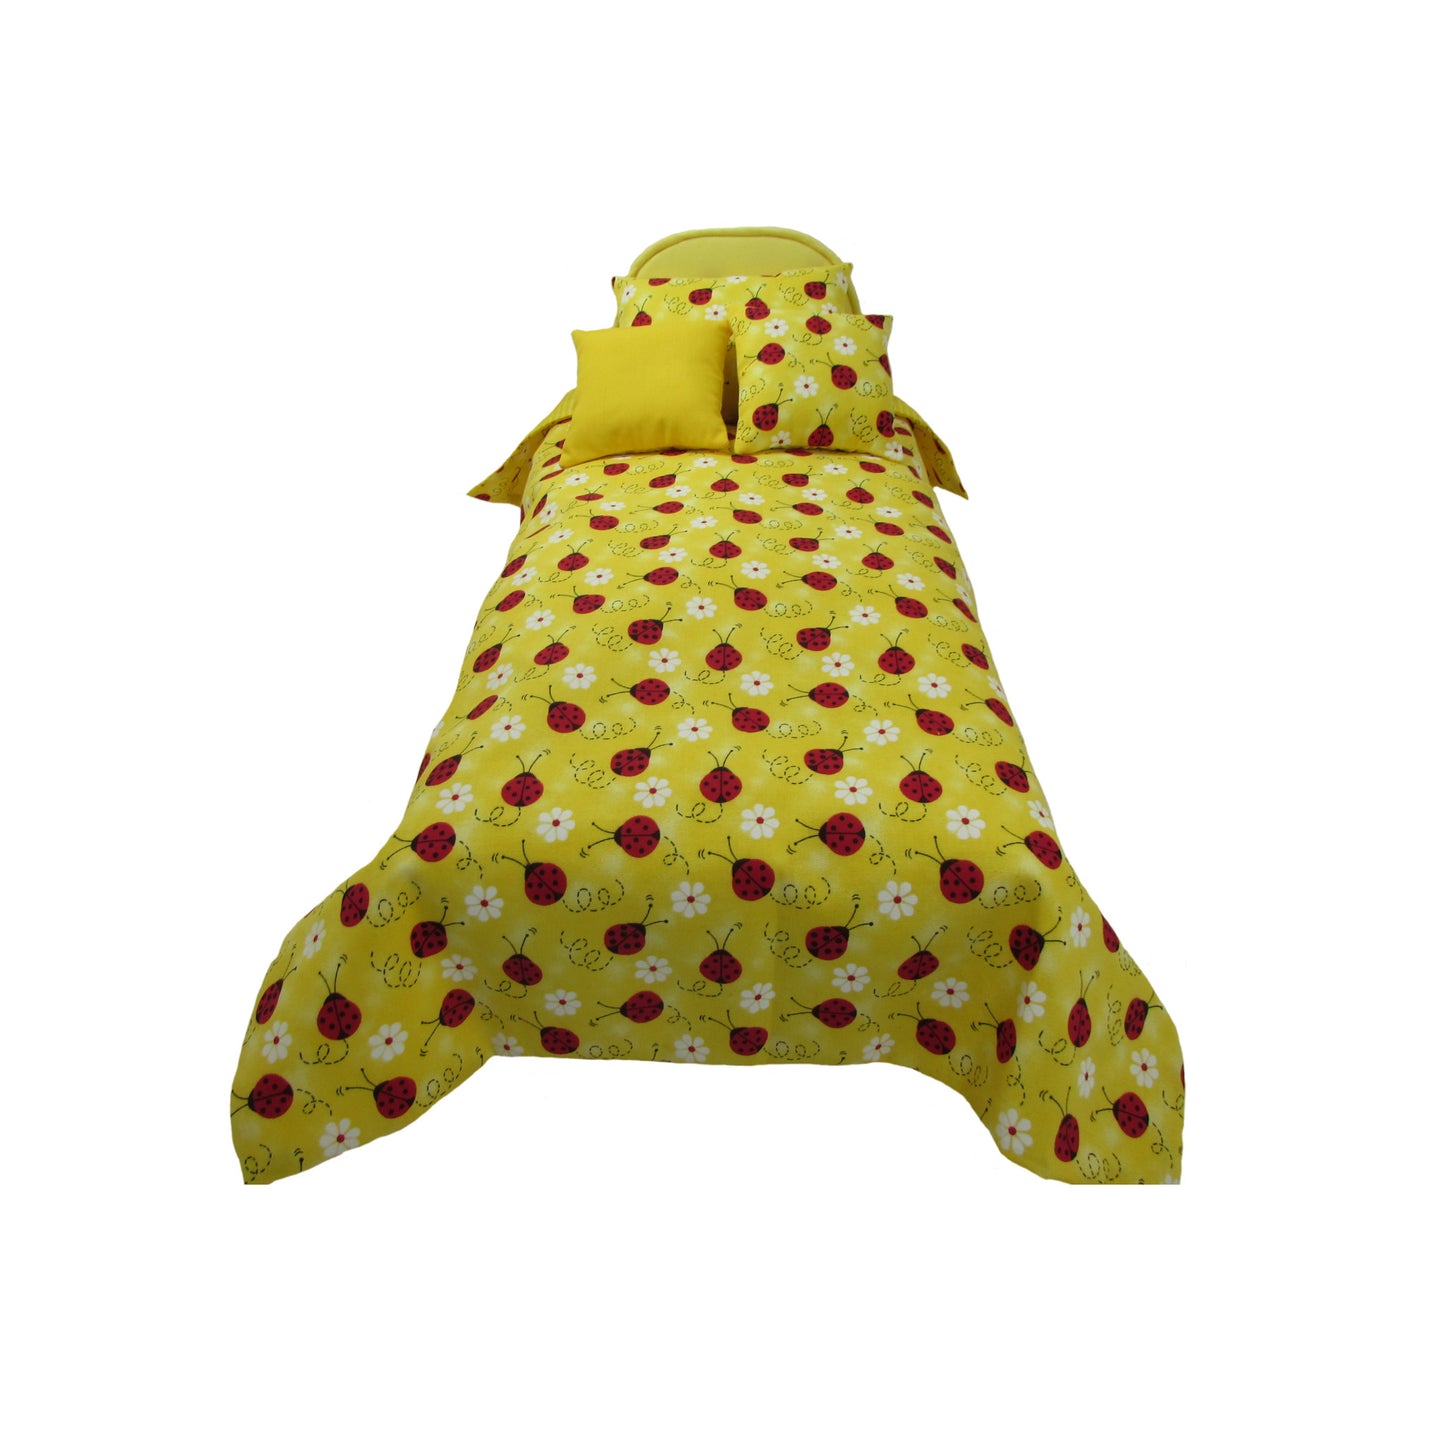 Upholstered Light Yellow Doll Bed and Ladybug Doll Bedding for 14.5-inch dolls Second view